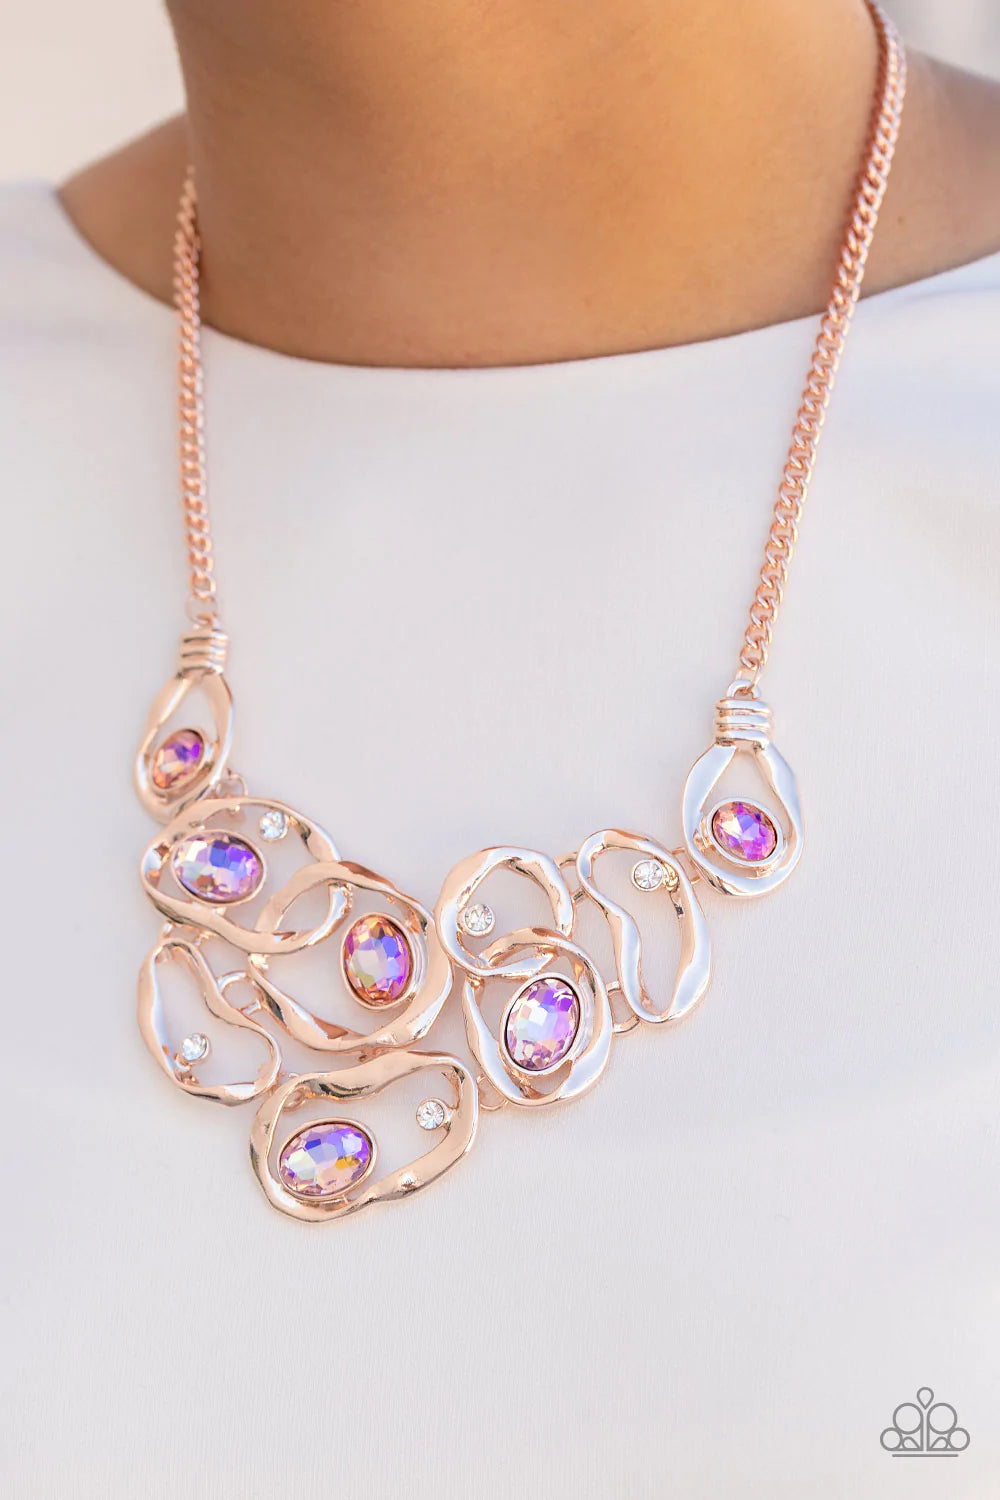 Warp Speed Paparazzi Necklace - Rose Gold - July 2022 Life Of the Party